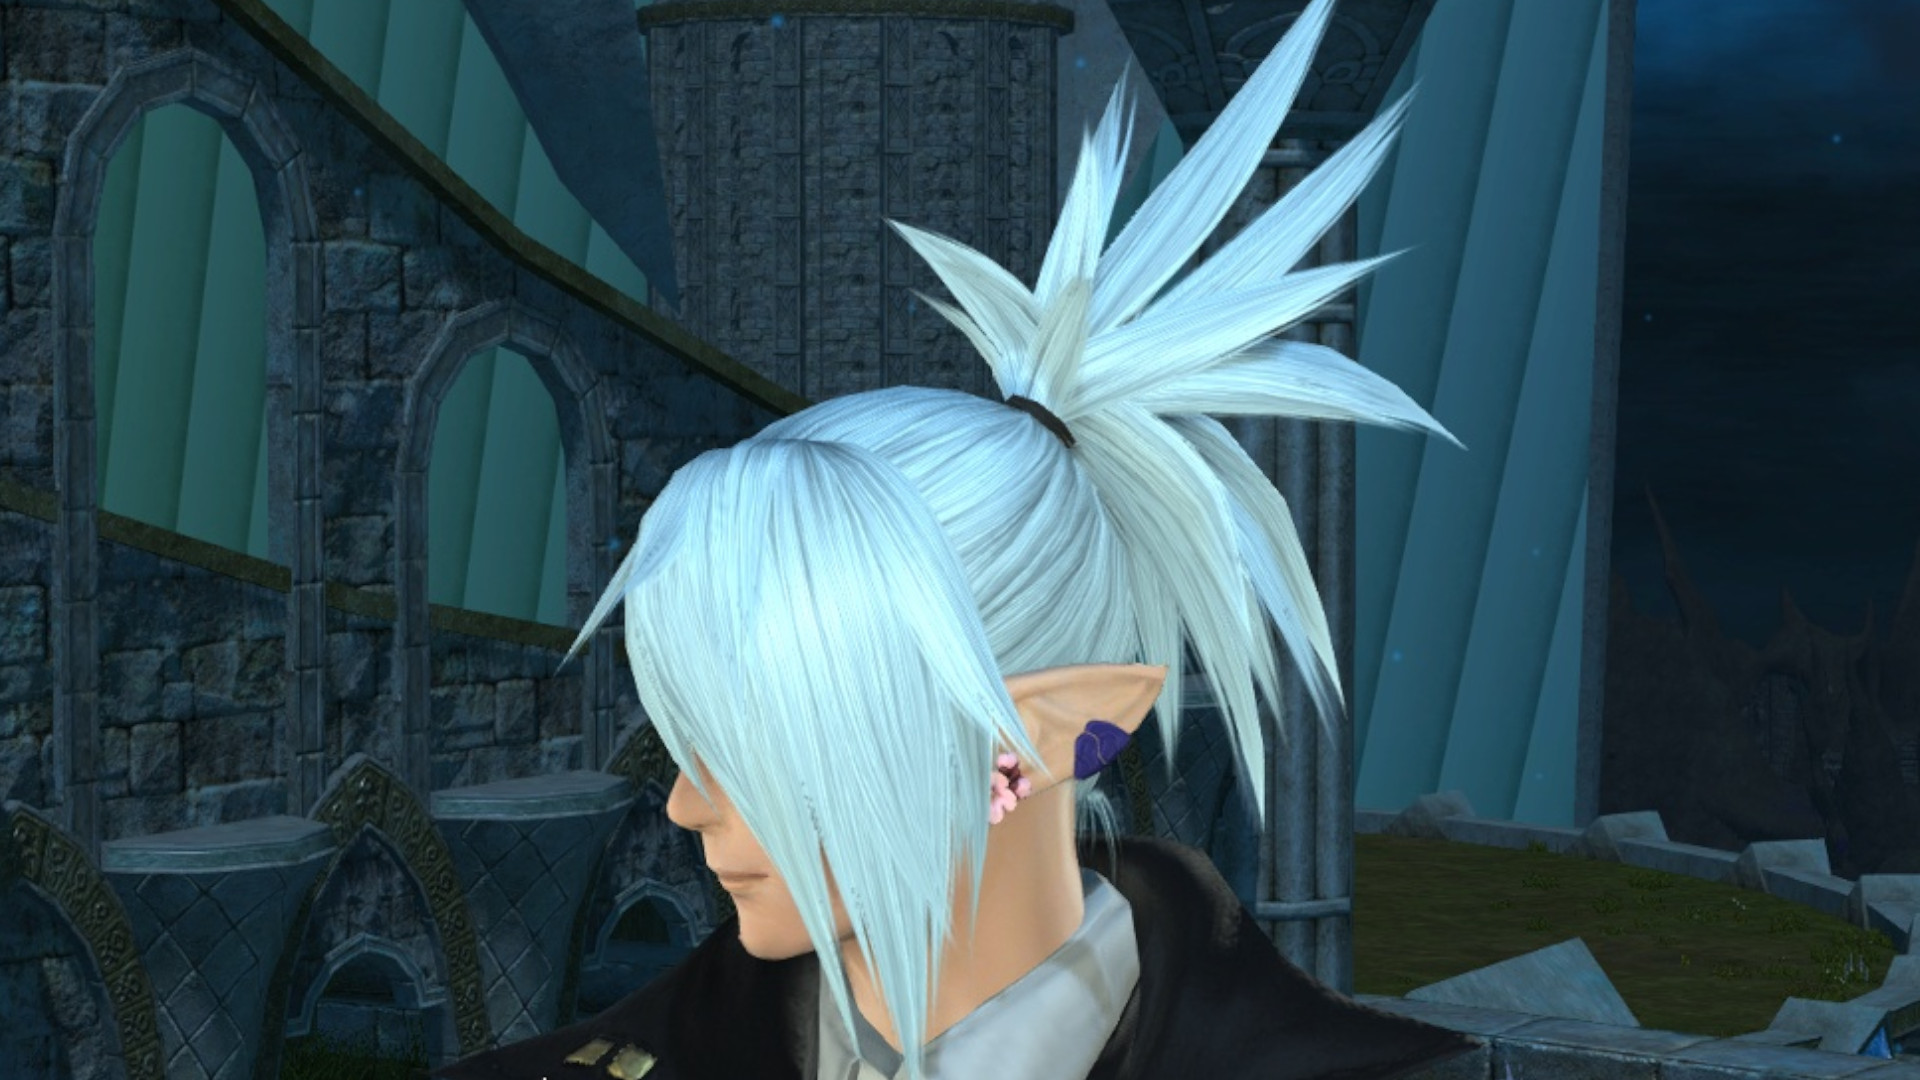 Hairstyles  Final Fantasy XIV A Realm Reborn Wiki  FFXIV  FF14 ARR  Community Wiki and Guide